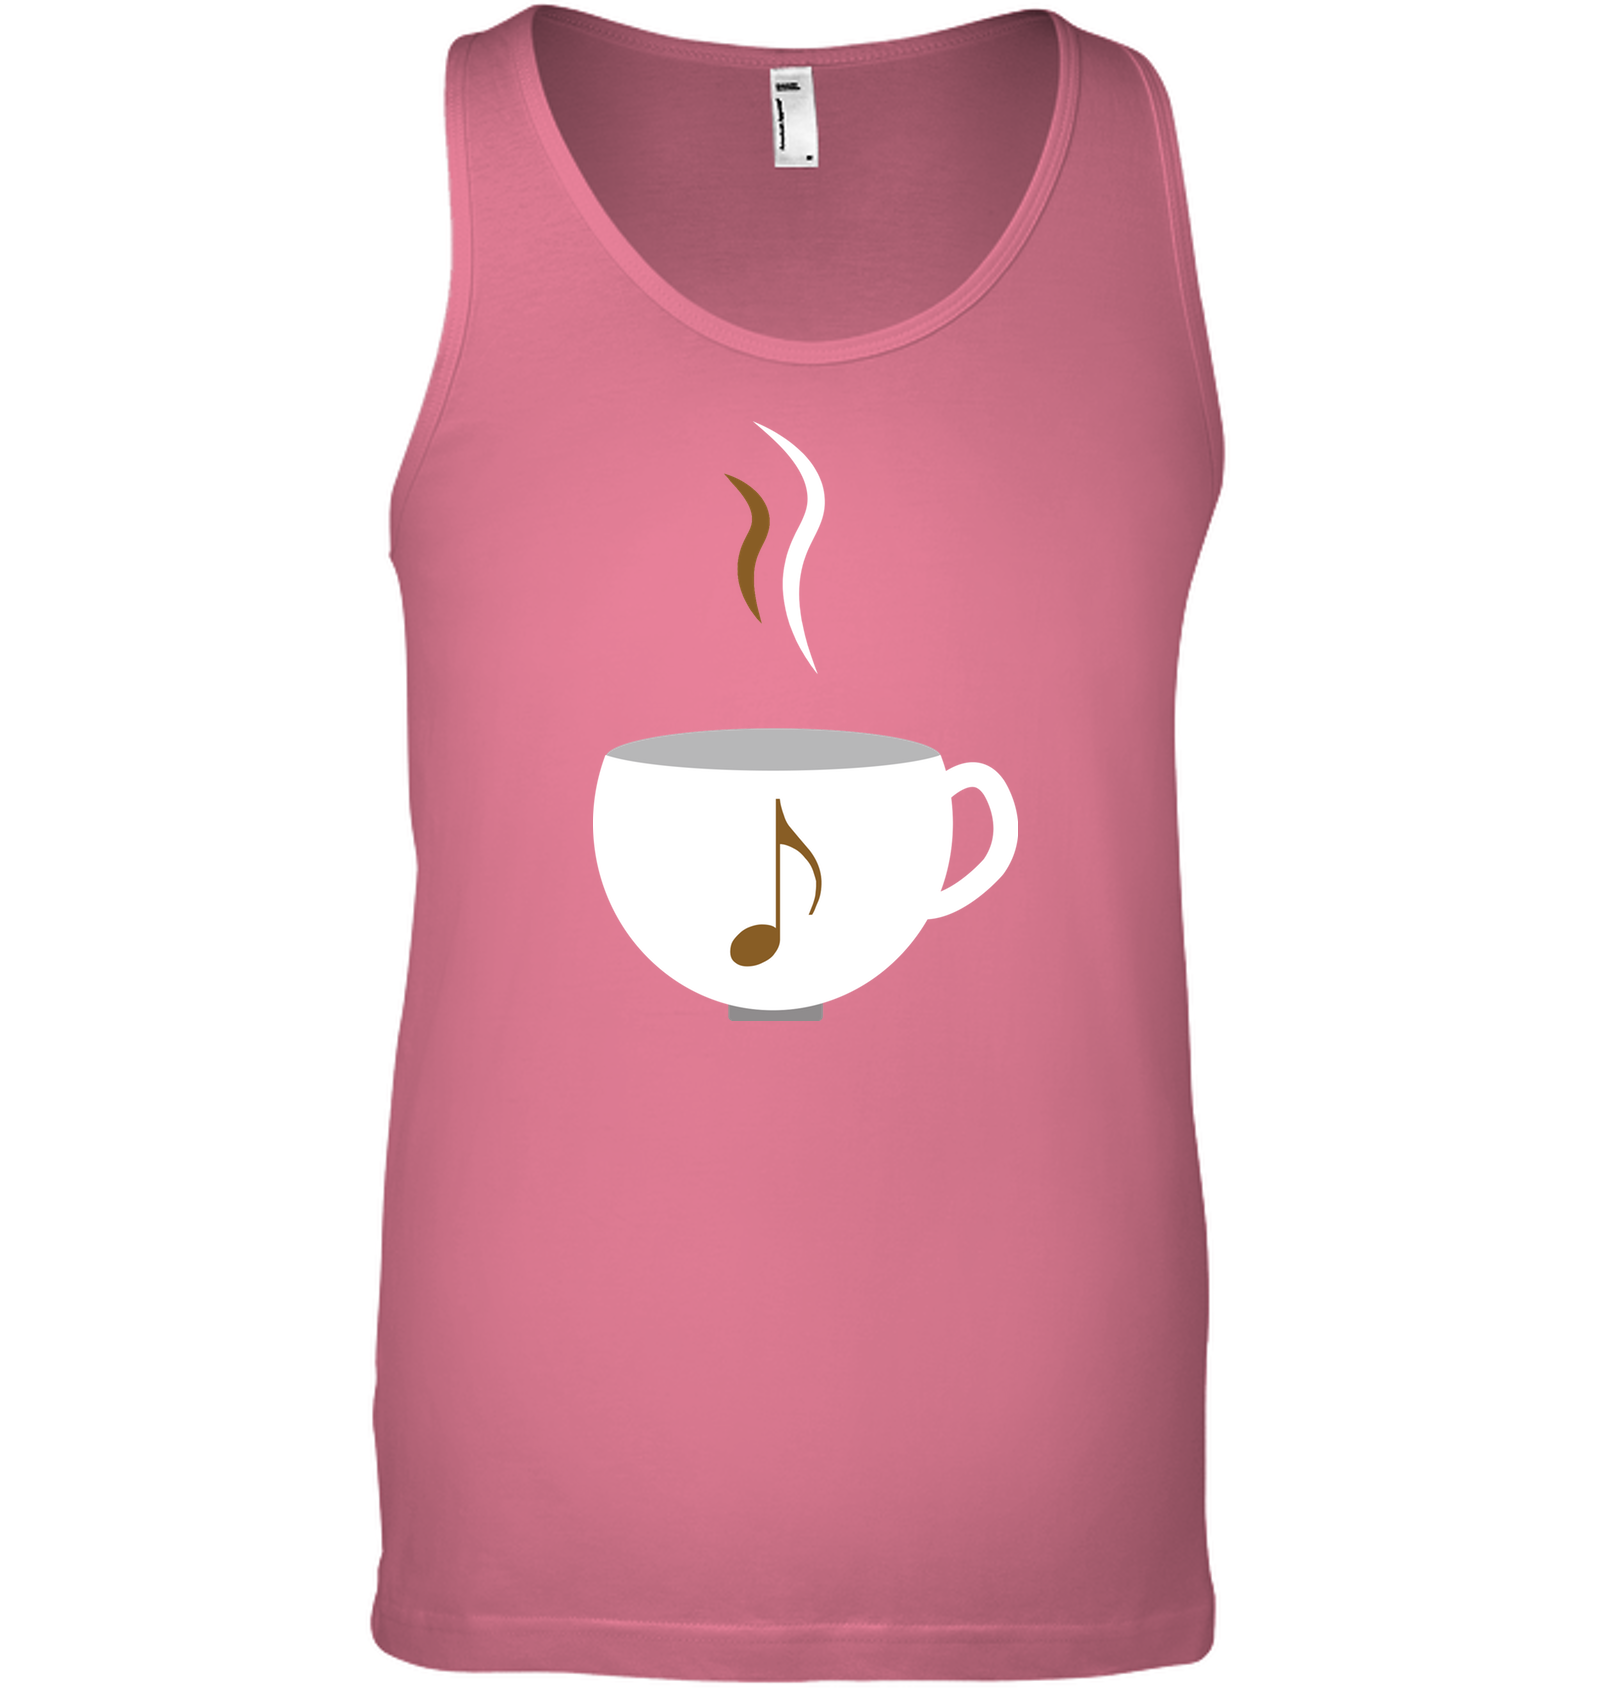 I Love Coffee with a splash of music - Bella + Canvas Unisex Jersey Tank